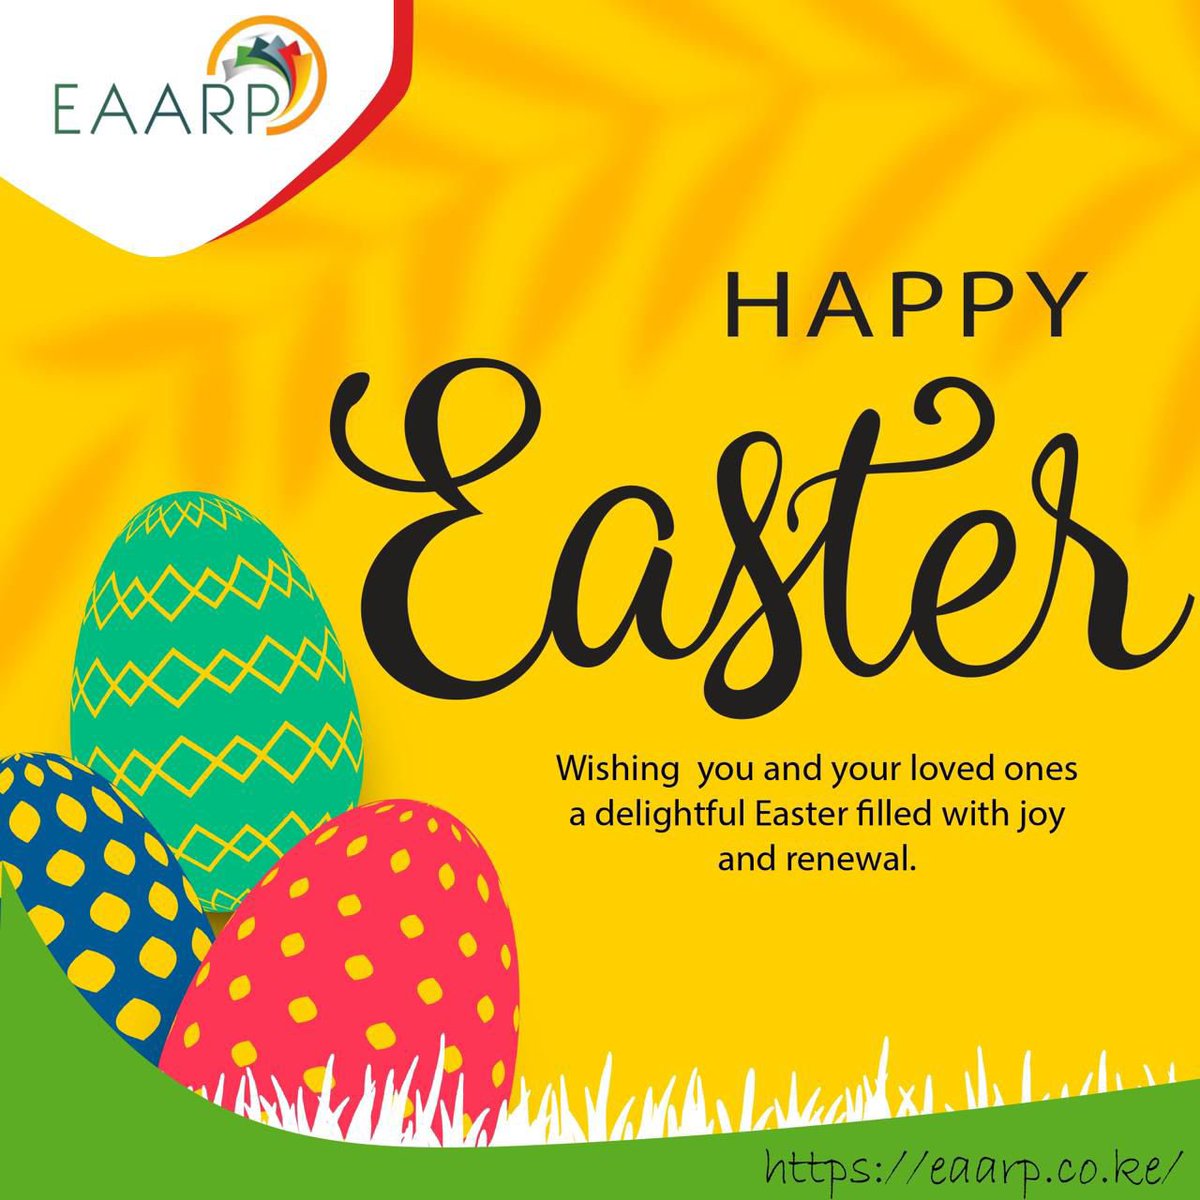 Happy Easter to all EAARP members! Wishing you a joyous celebration filled with love, happiness, and renewal.